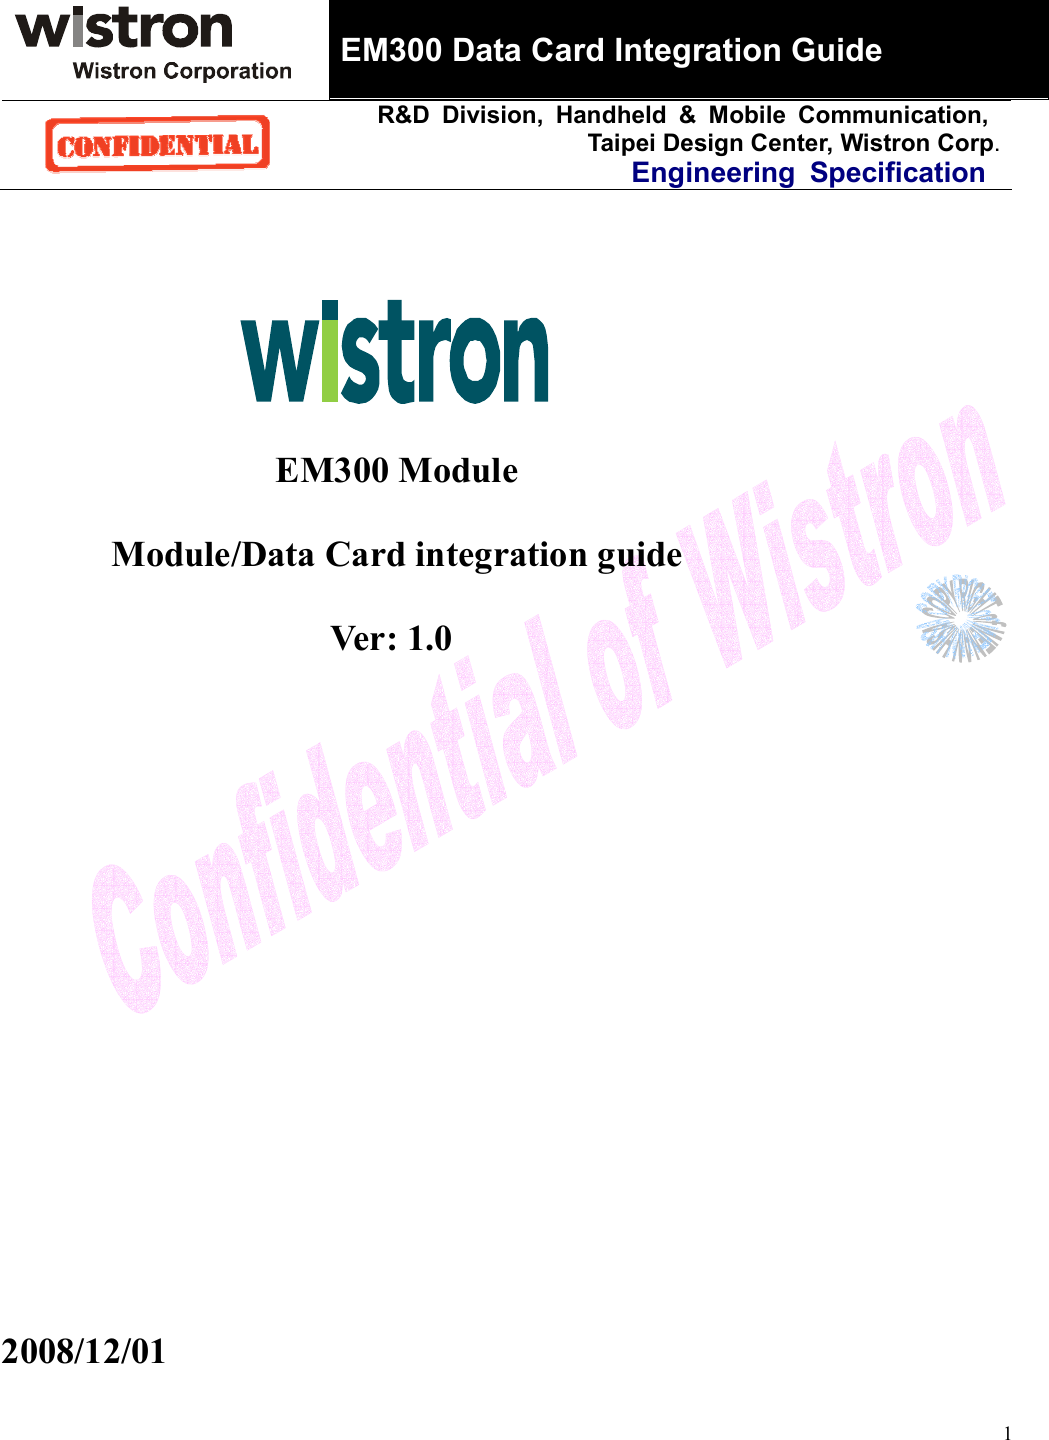 EM300 Data Card Integration GuideR&amp;D Division, Handheld &amp; Mobile Communication, Taipei Design Center, Wistron Corp.Engineering Specification 1                  EM300 Module       Module/Data Card integration guide                      Ver: 1.0 2008/12/01